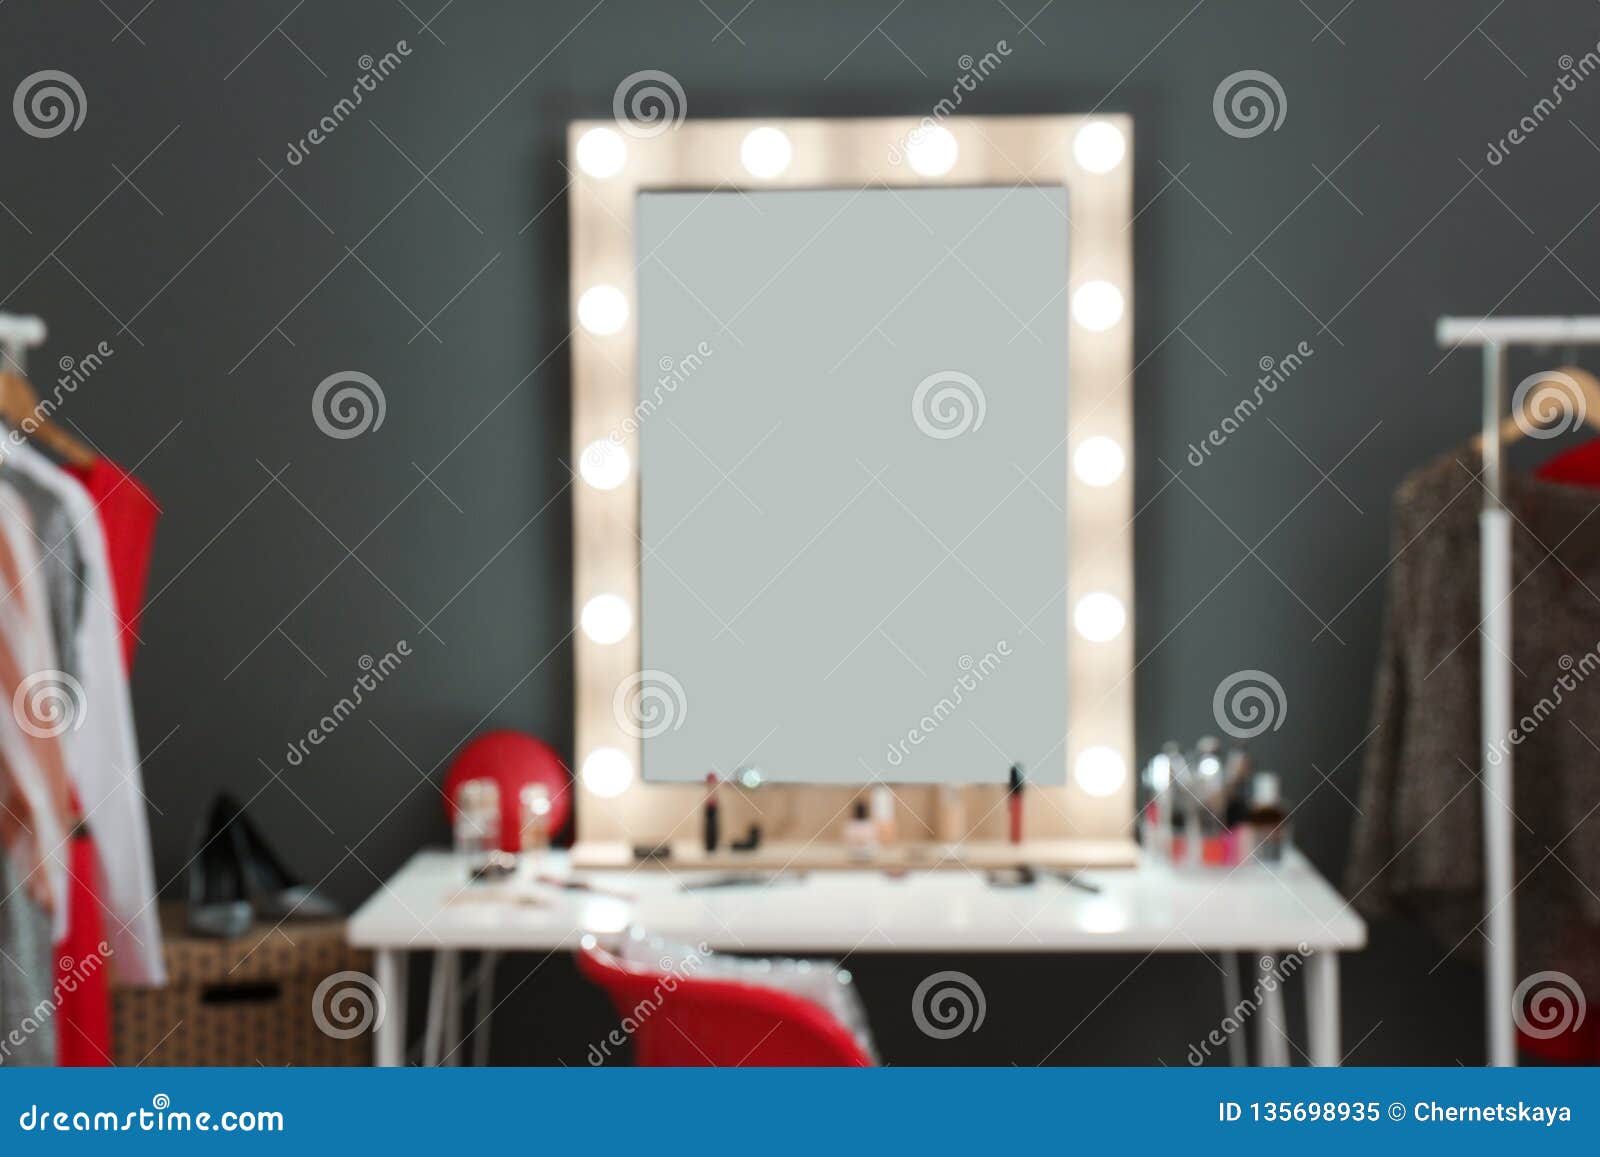 Stylish Room With Dressing Table Mirror And Wardrobe Stock